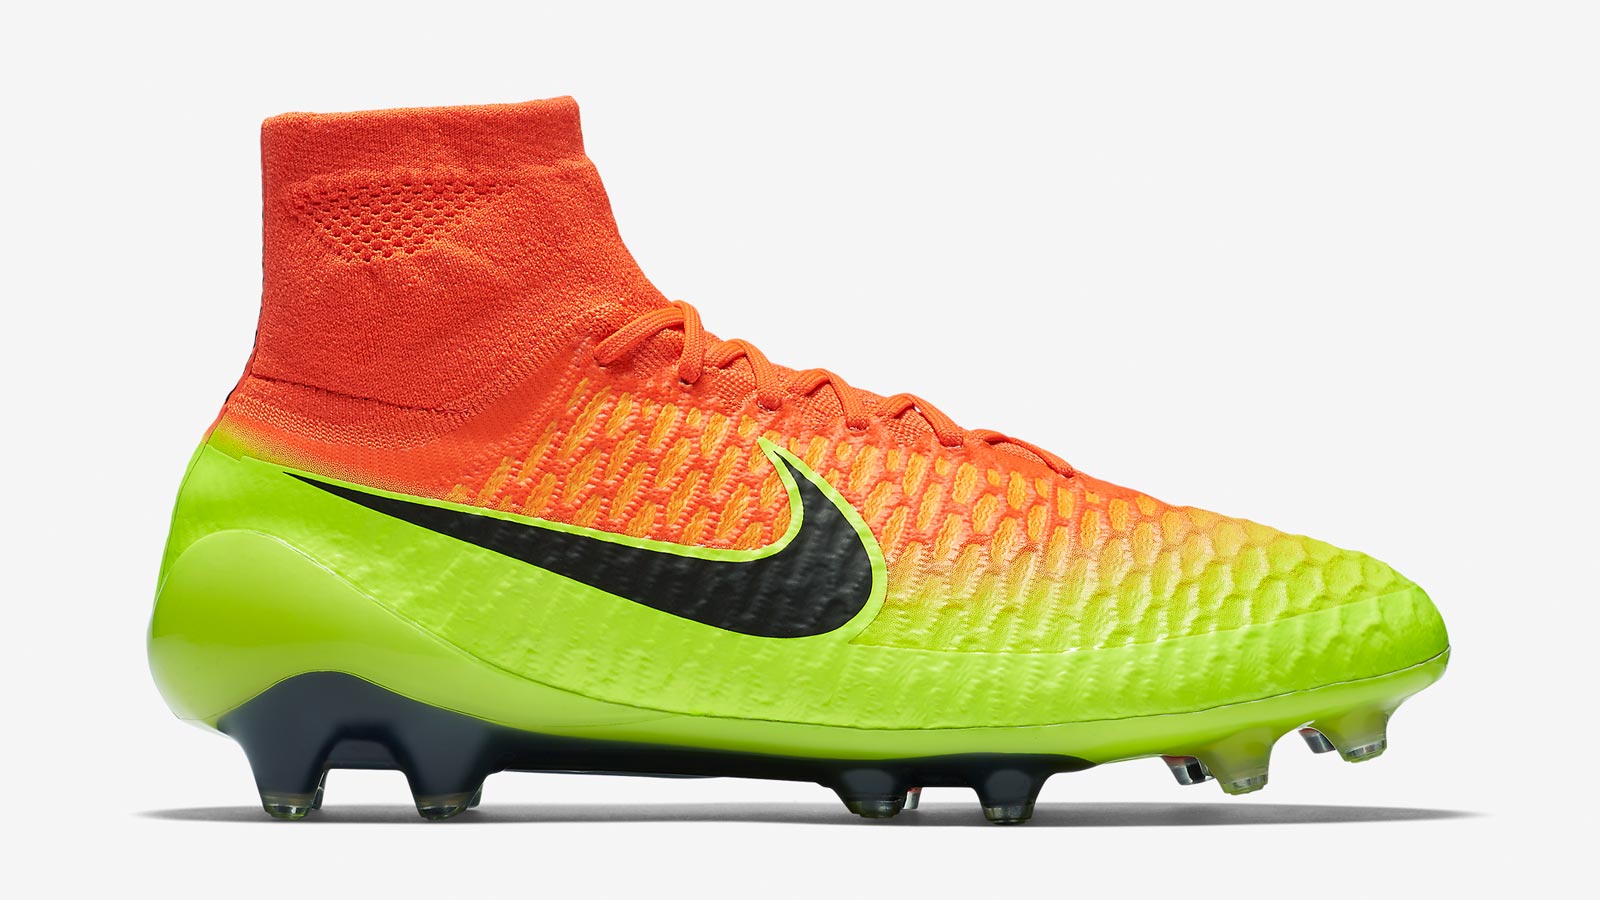 Goodbye - Here is The Full History & All Colorways of The Nike Magista Obra Football Boot - Footy Headlines